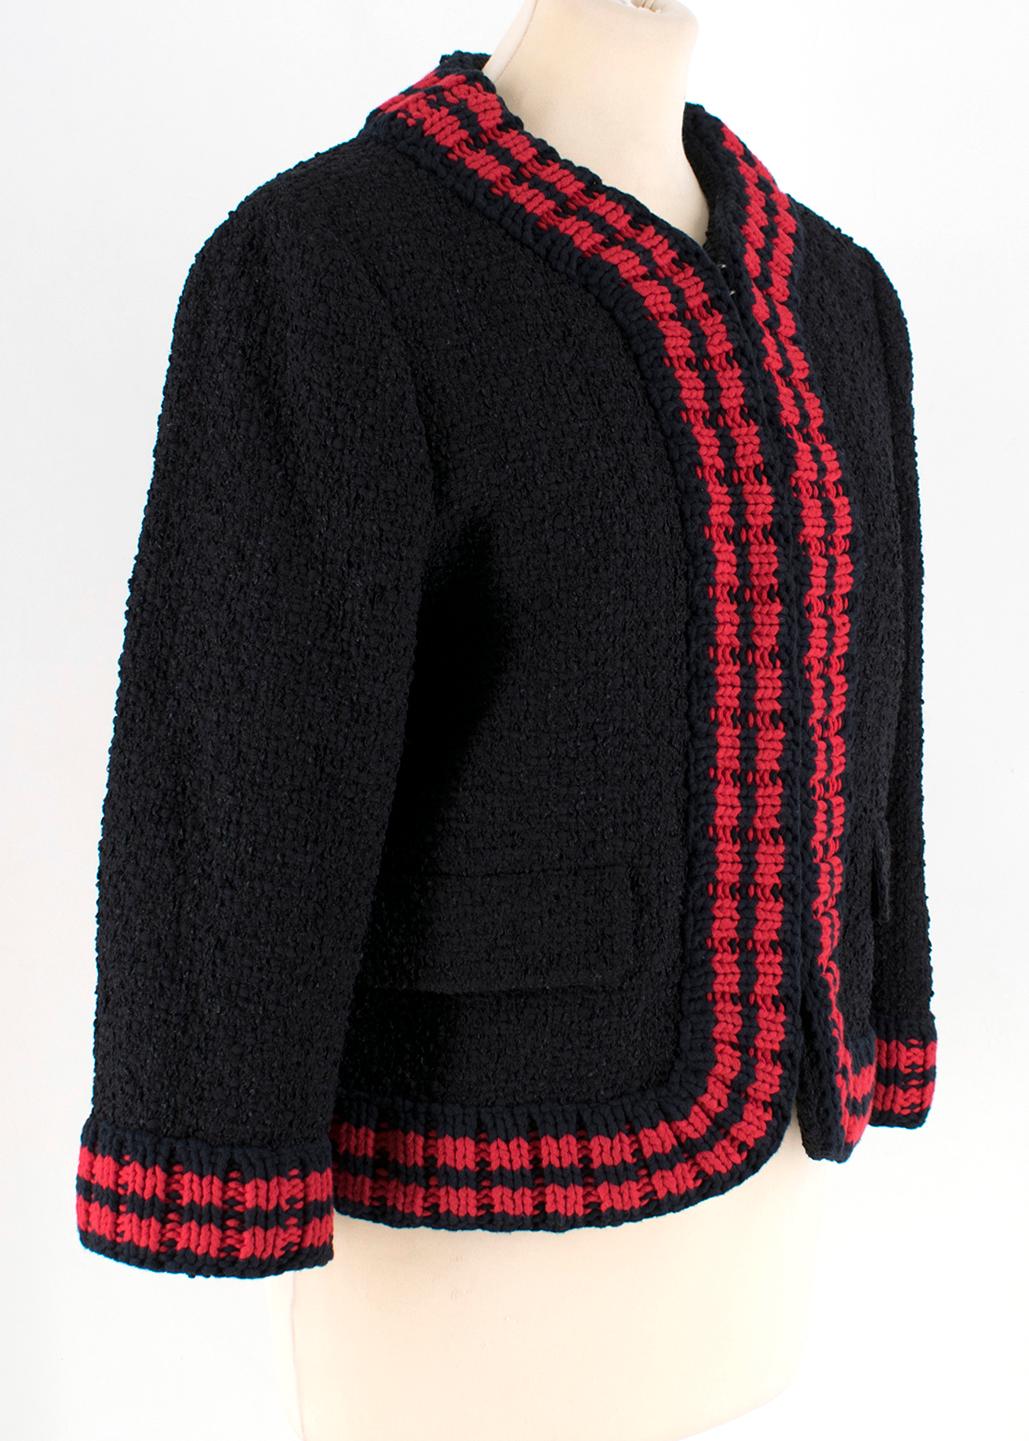 Gucci Tweed Jacket With Knit Red Trim

- Wool-blend tweed jacket.
- Trimmed with contrasting red and navy knit.
- Cropped style in a mid-weight material.
- Embroidered heart accent on lining. 
- Hook and eye fastening down centre.
- Flap pockets at